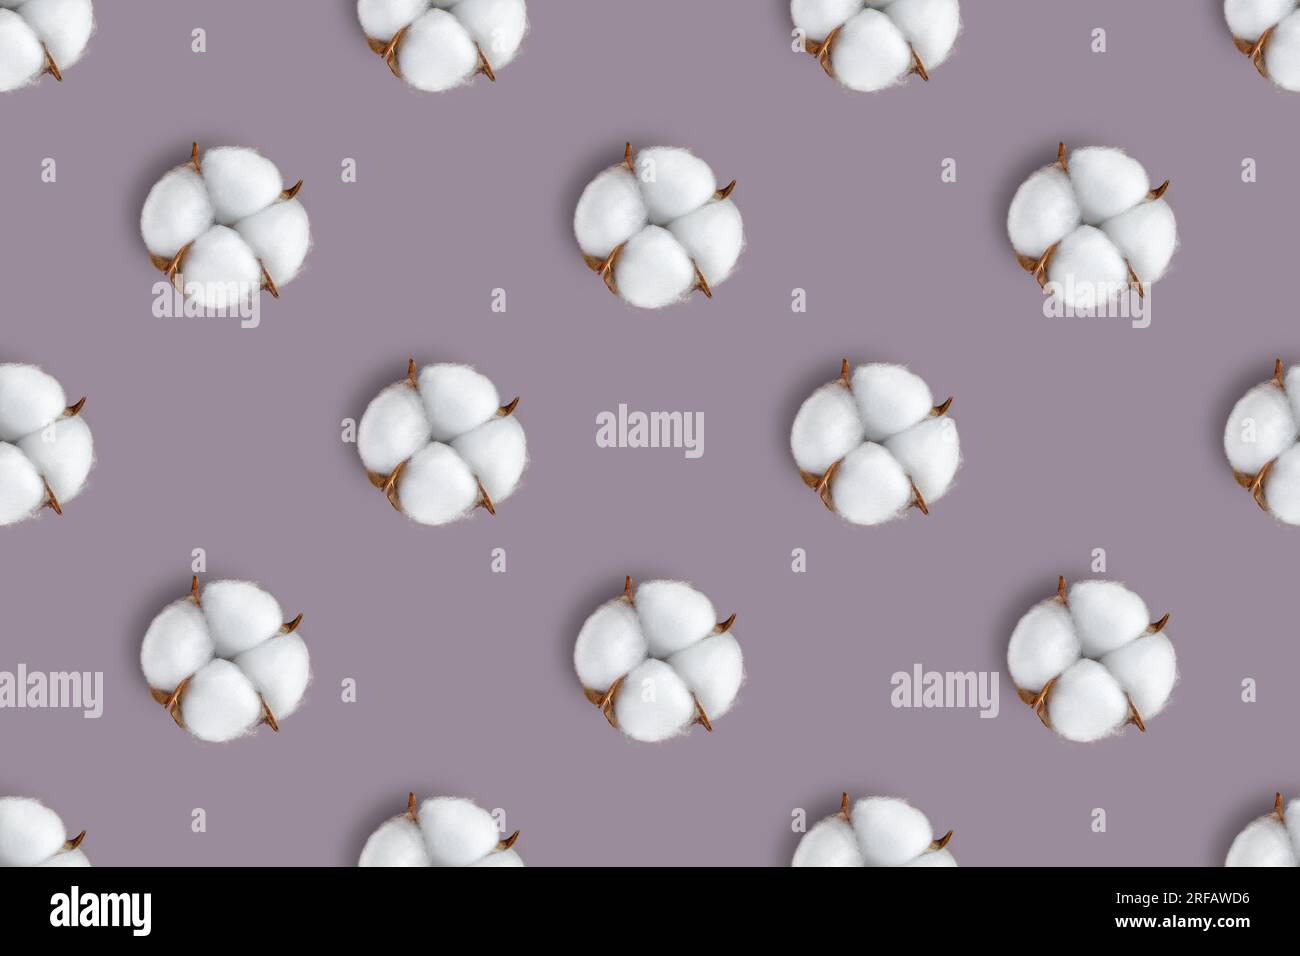 Cotton flower seamless pattern isolated on pale purple background. Top view, flat lay, wallpaper, backdrop Stock Photo